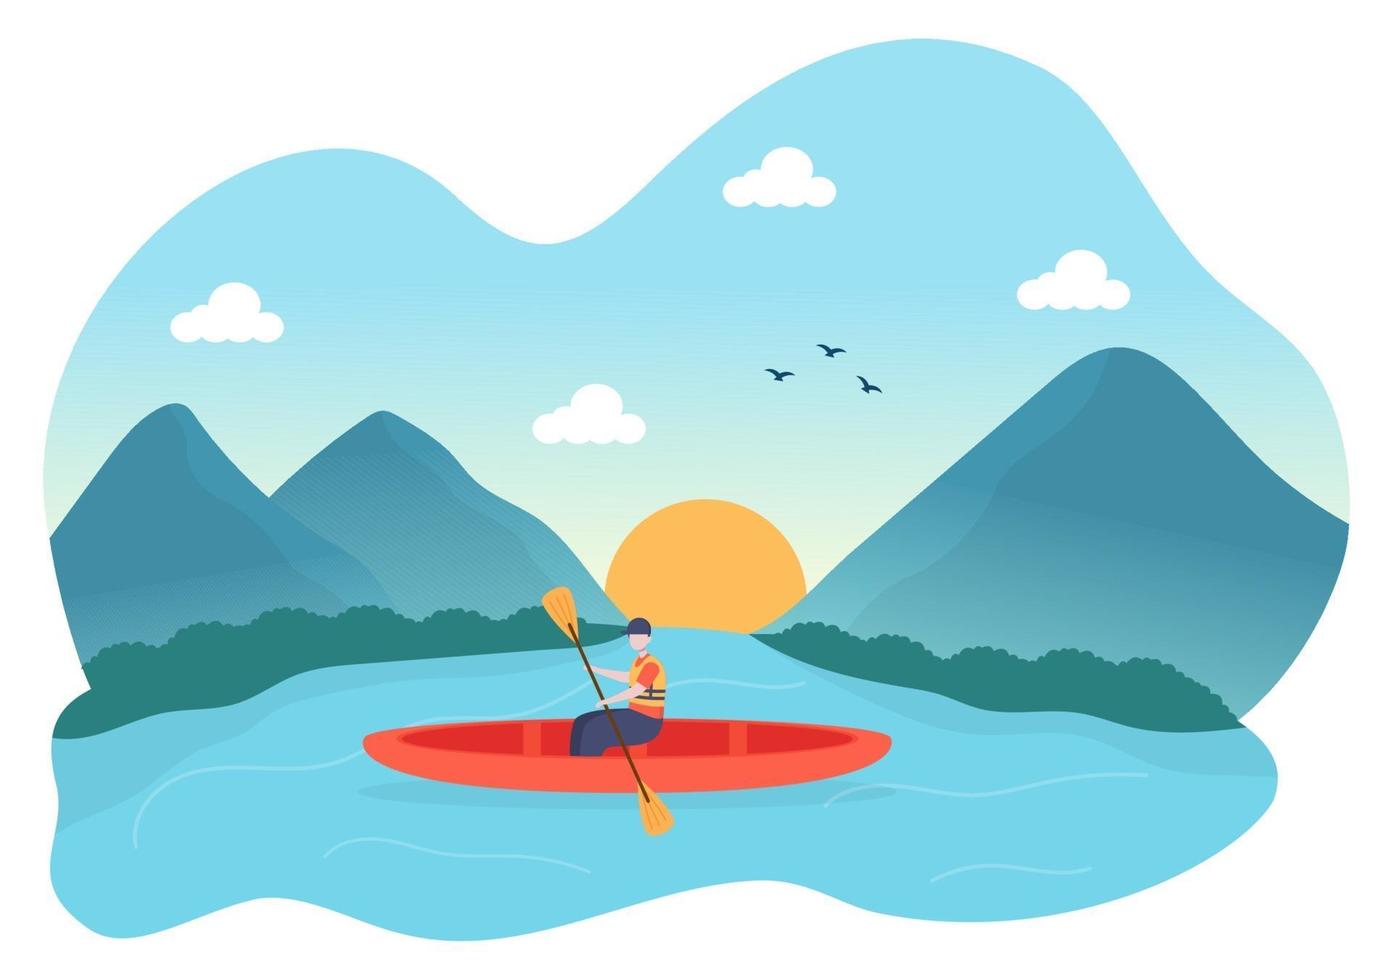 Rafting, Canoeing, Kayaking in the River Vector Illustration